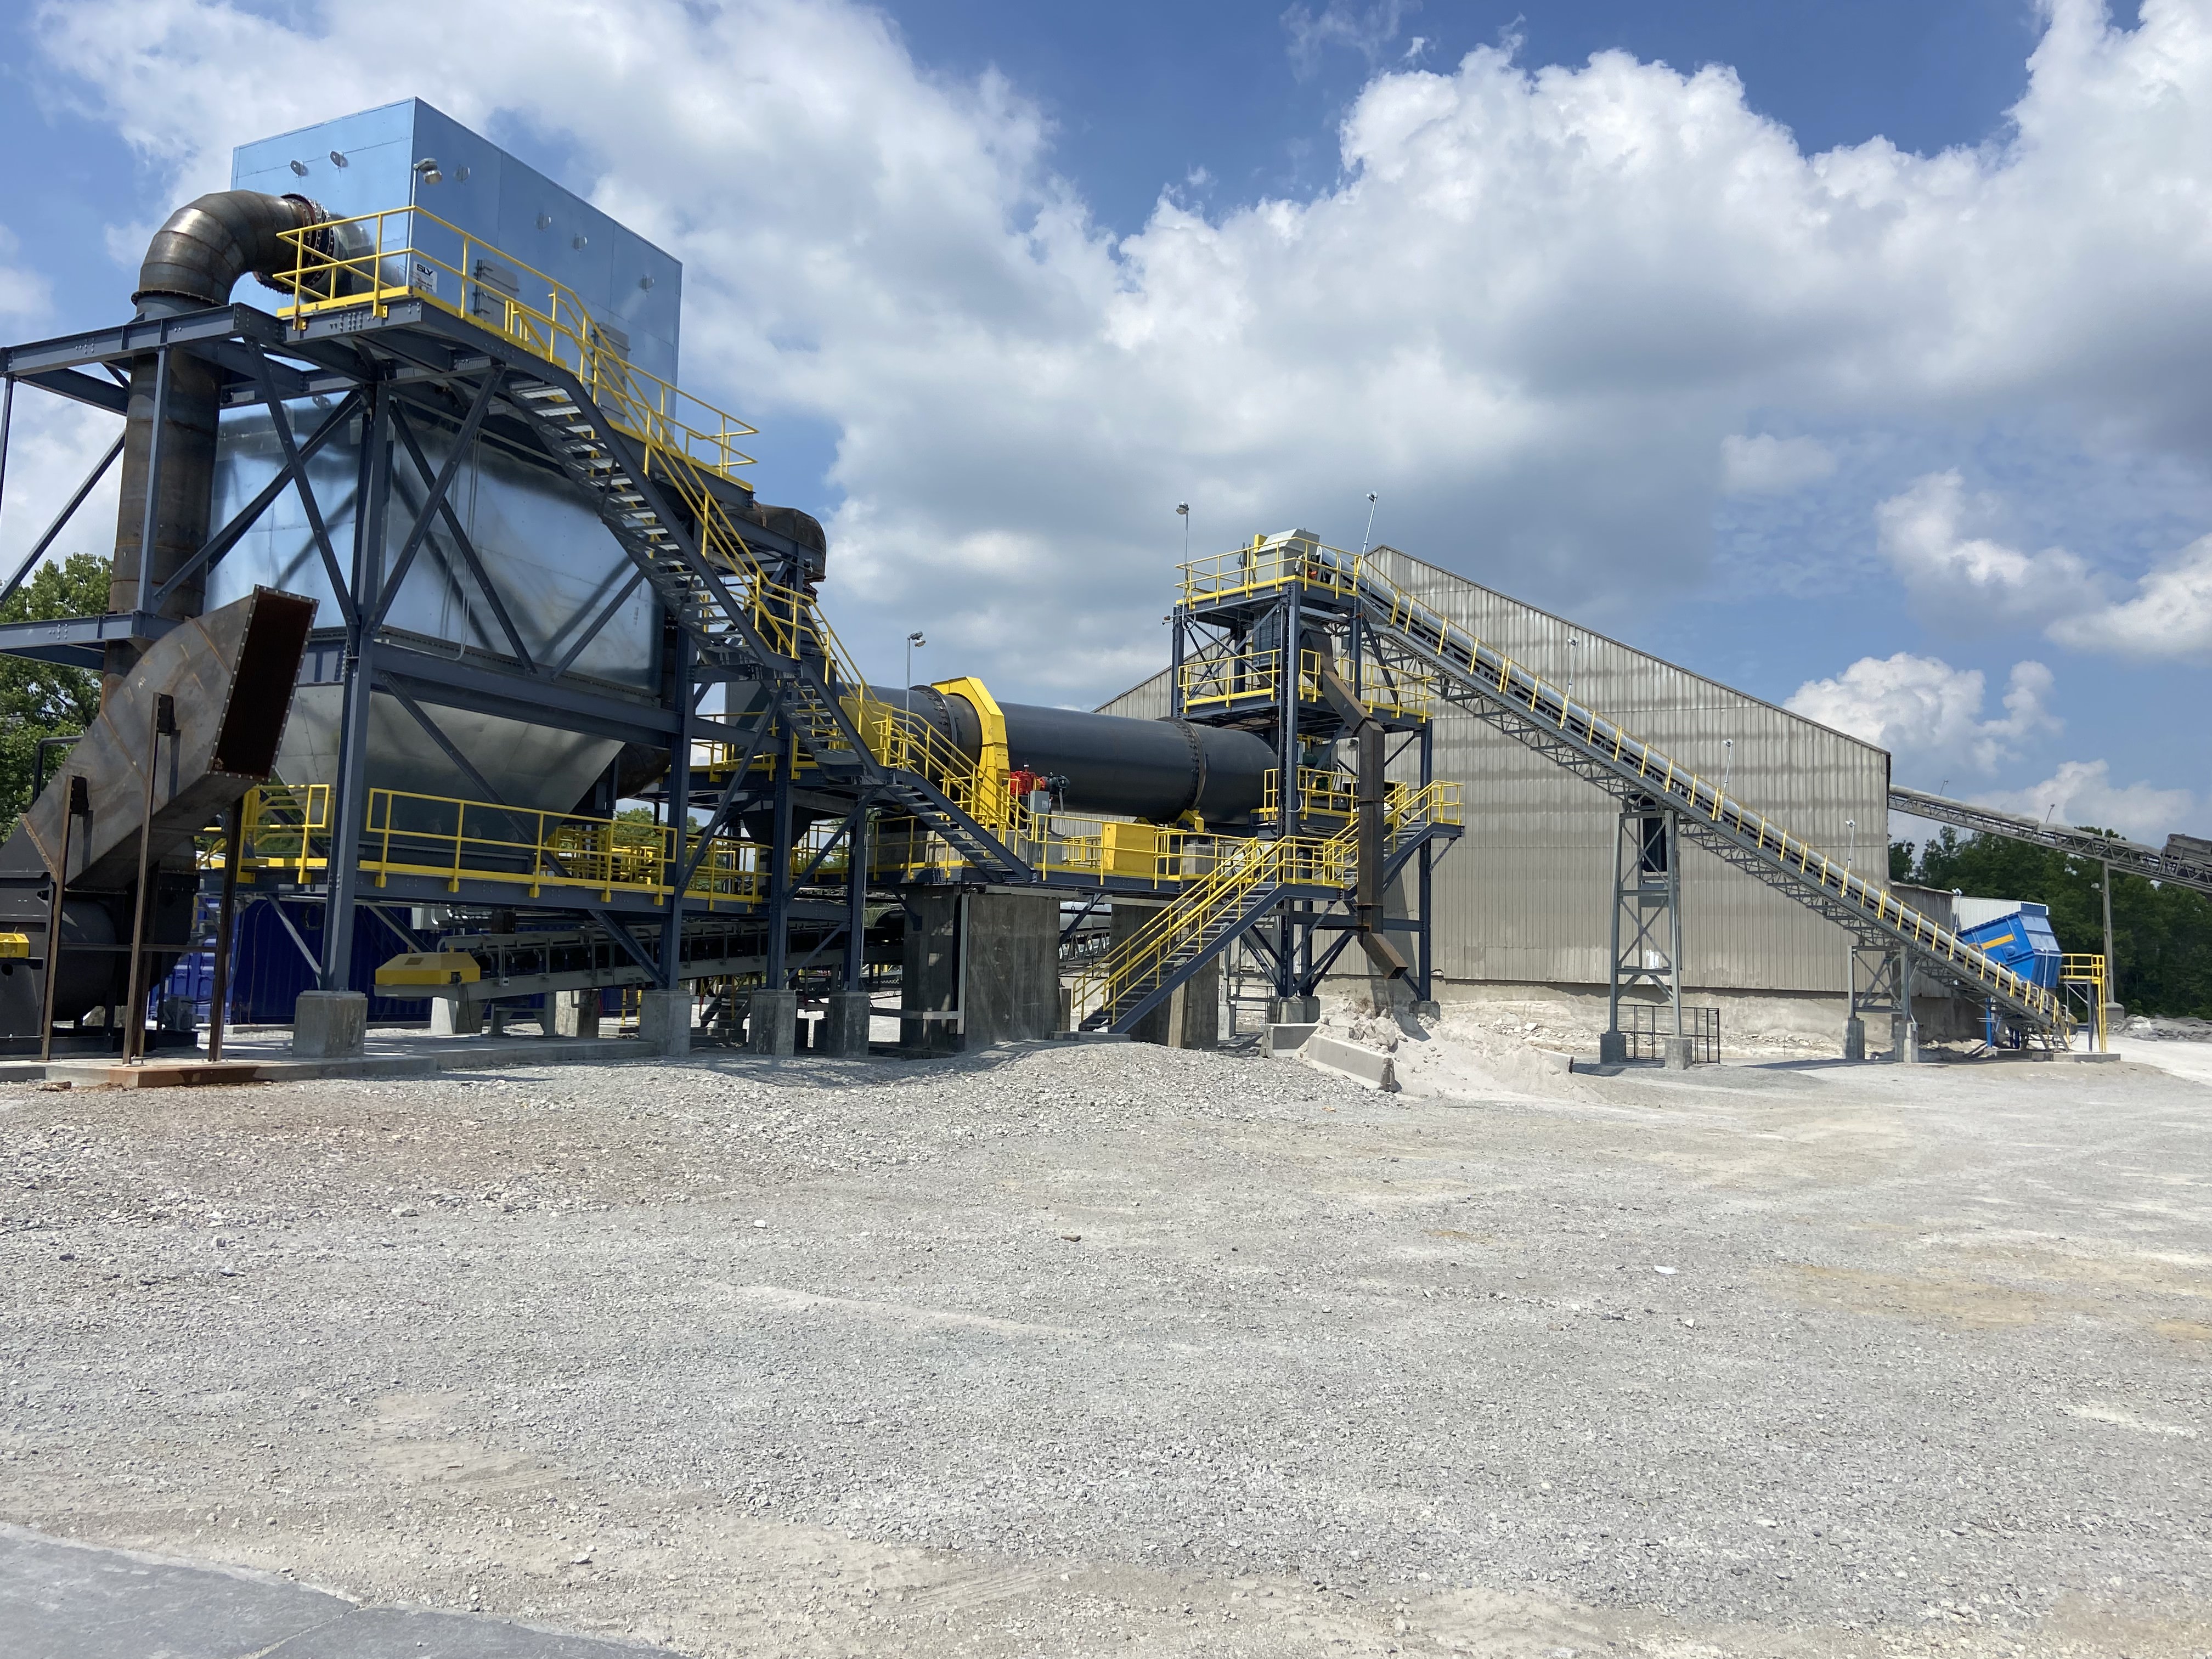 Following last year’s opening of its new state-of-the-art cement plant in Mitchell, Indiana, Heidelberg Materials North America invested in modifying the Speed facility to produce slag cement from domestically sourced slag granules.